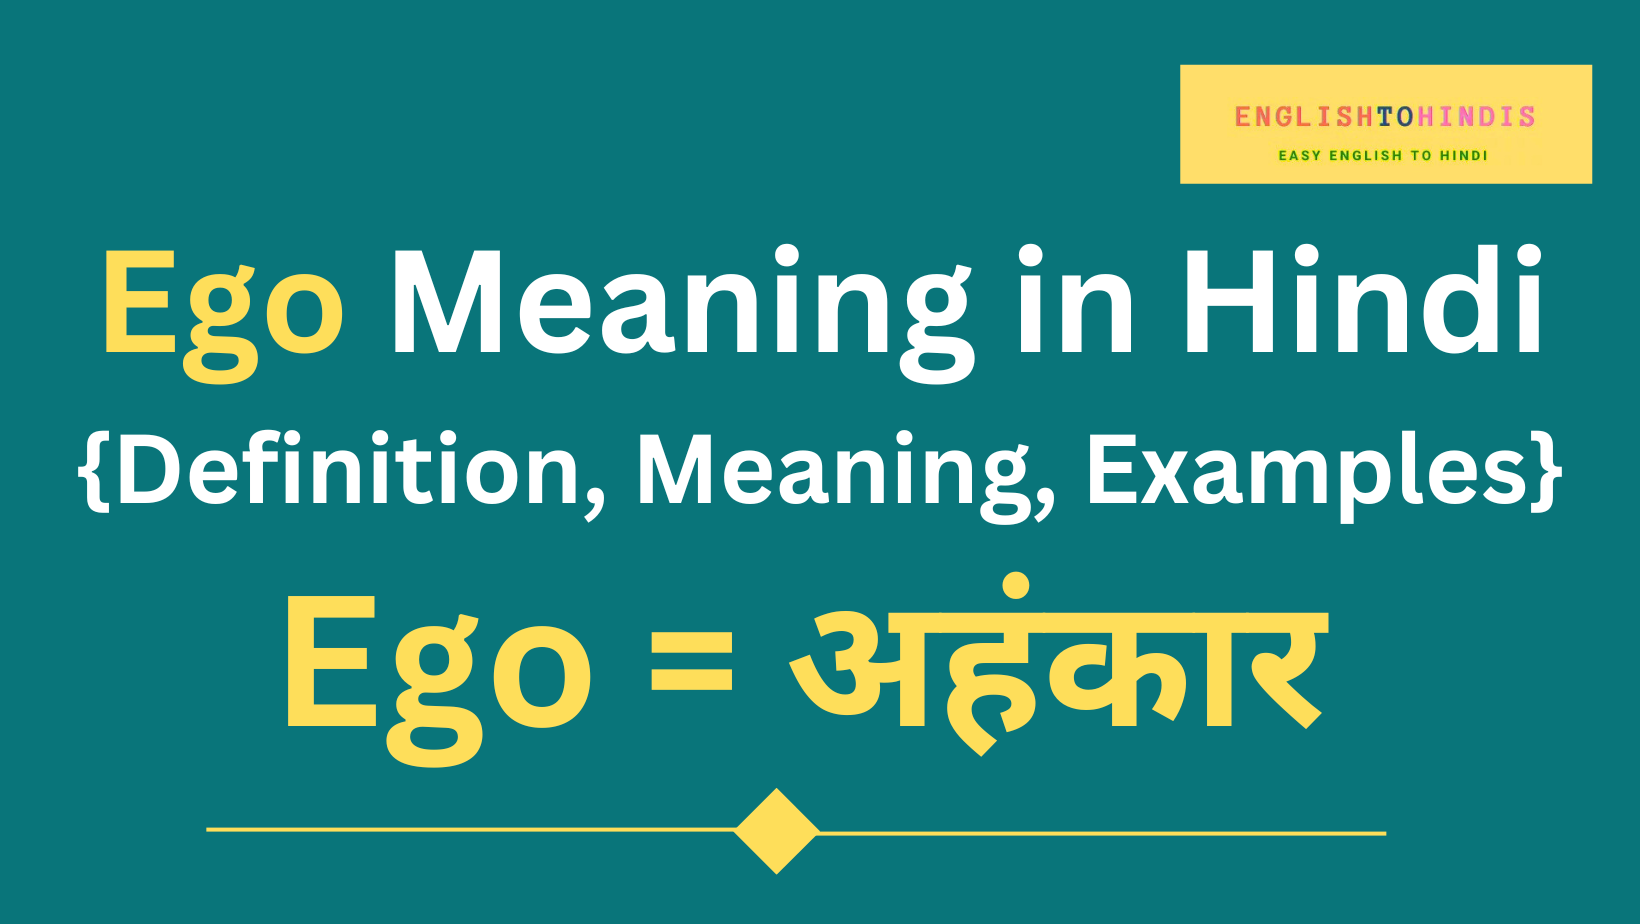 Ego Meaning in Hindi